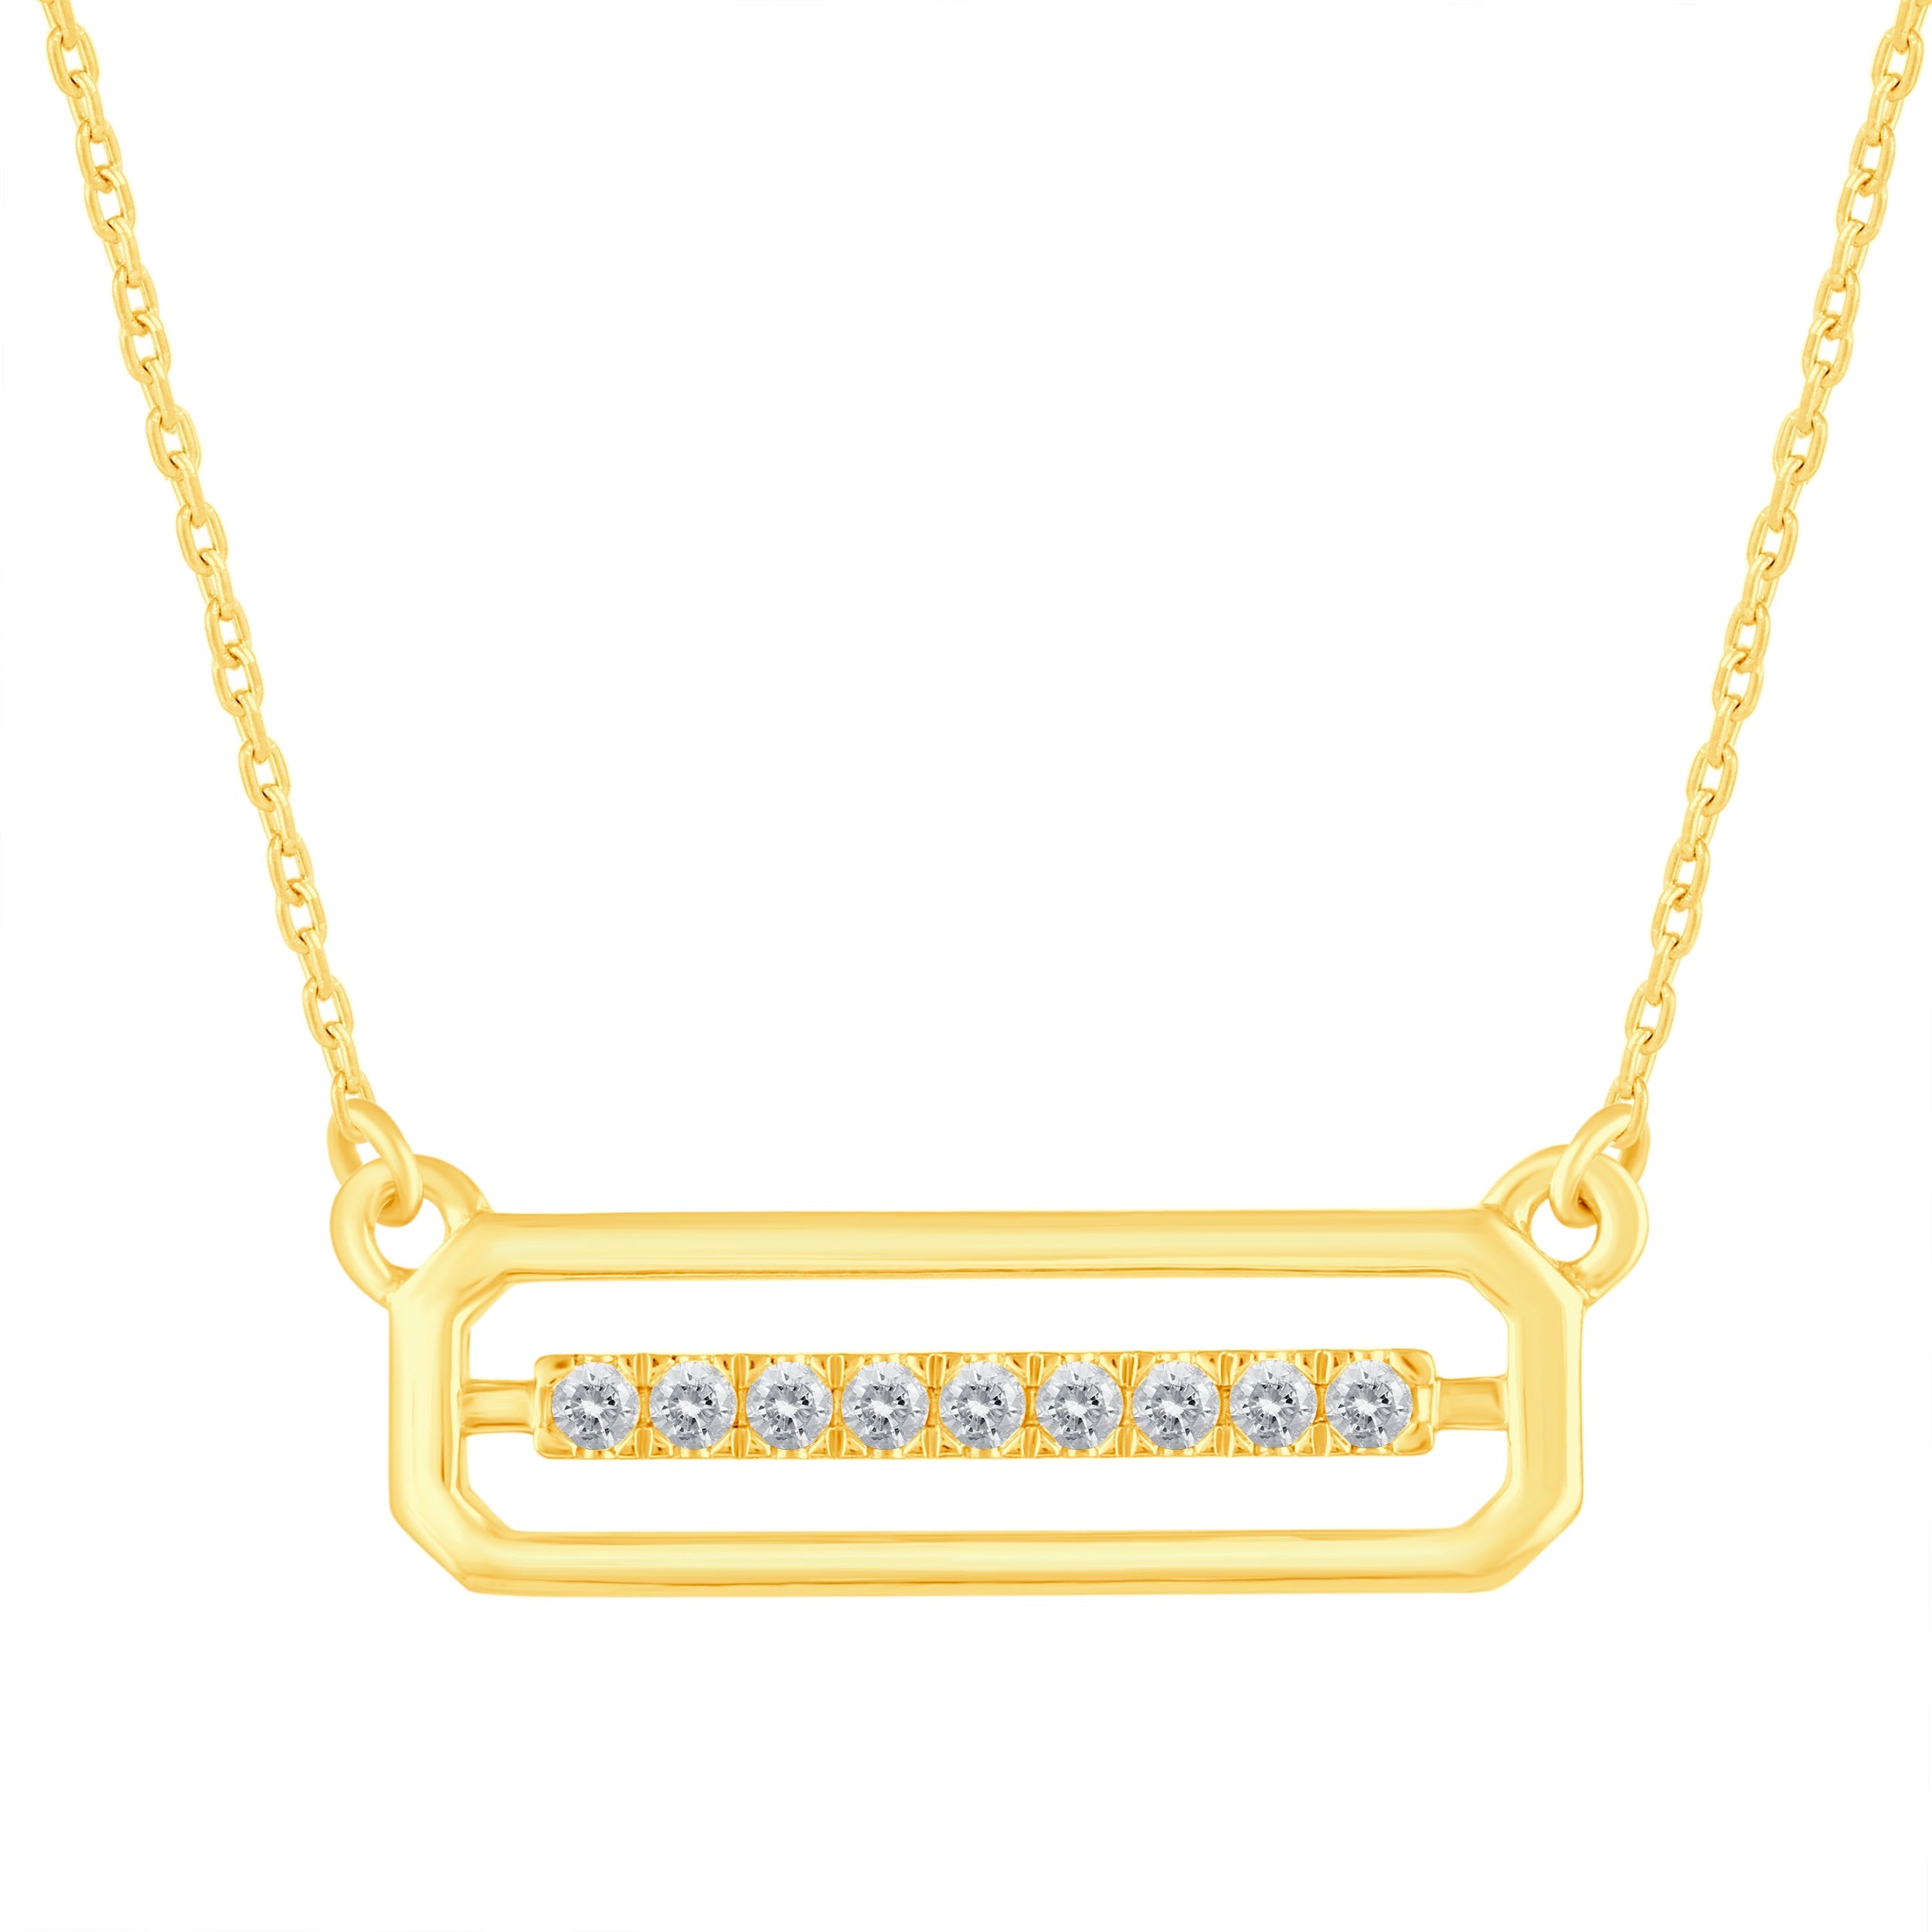 1/4 - 1/10 Cttw Diamond Bar Pendant Necklace set in 925 Sterling Silver 14K  Yellow Gold Plating (Select Design)